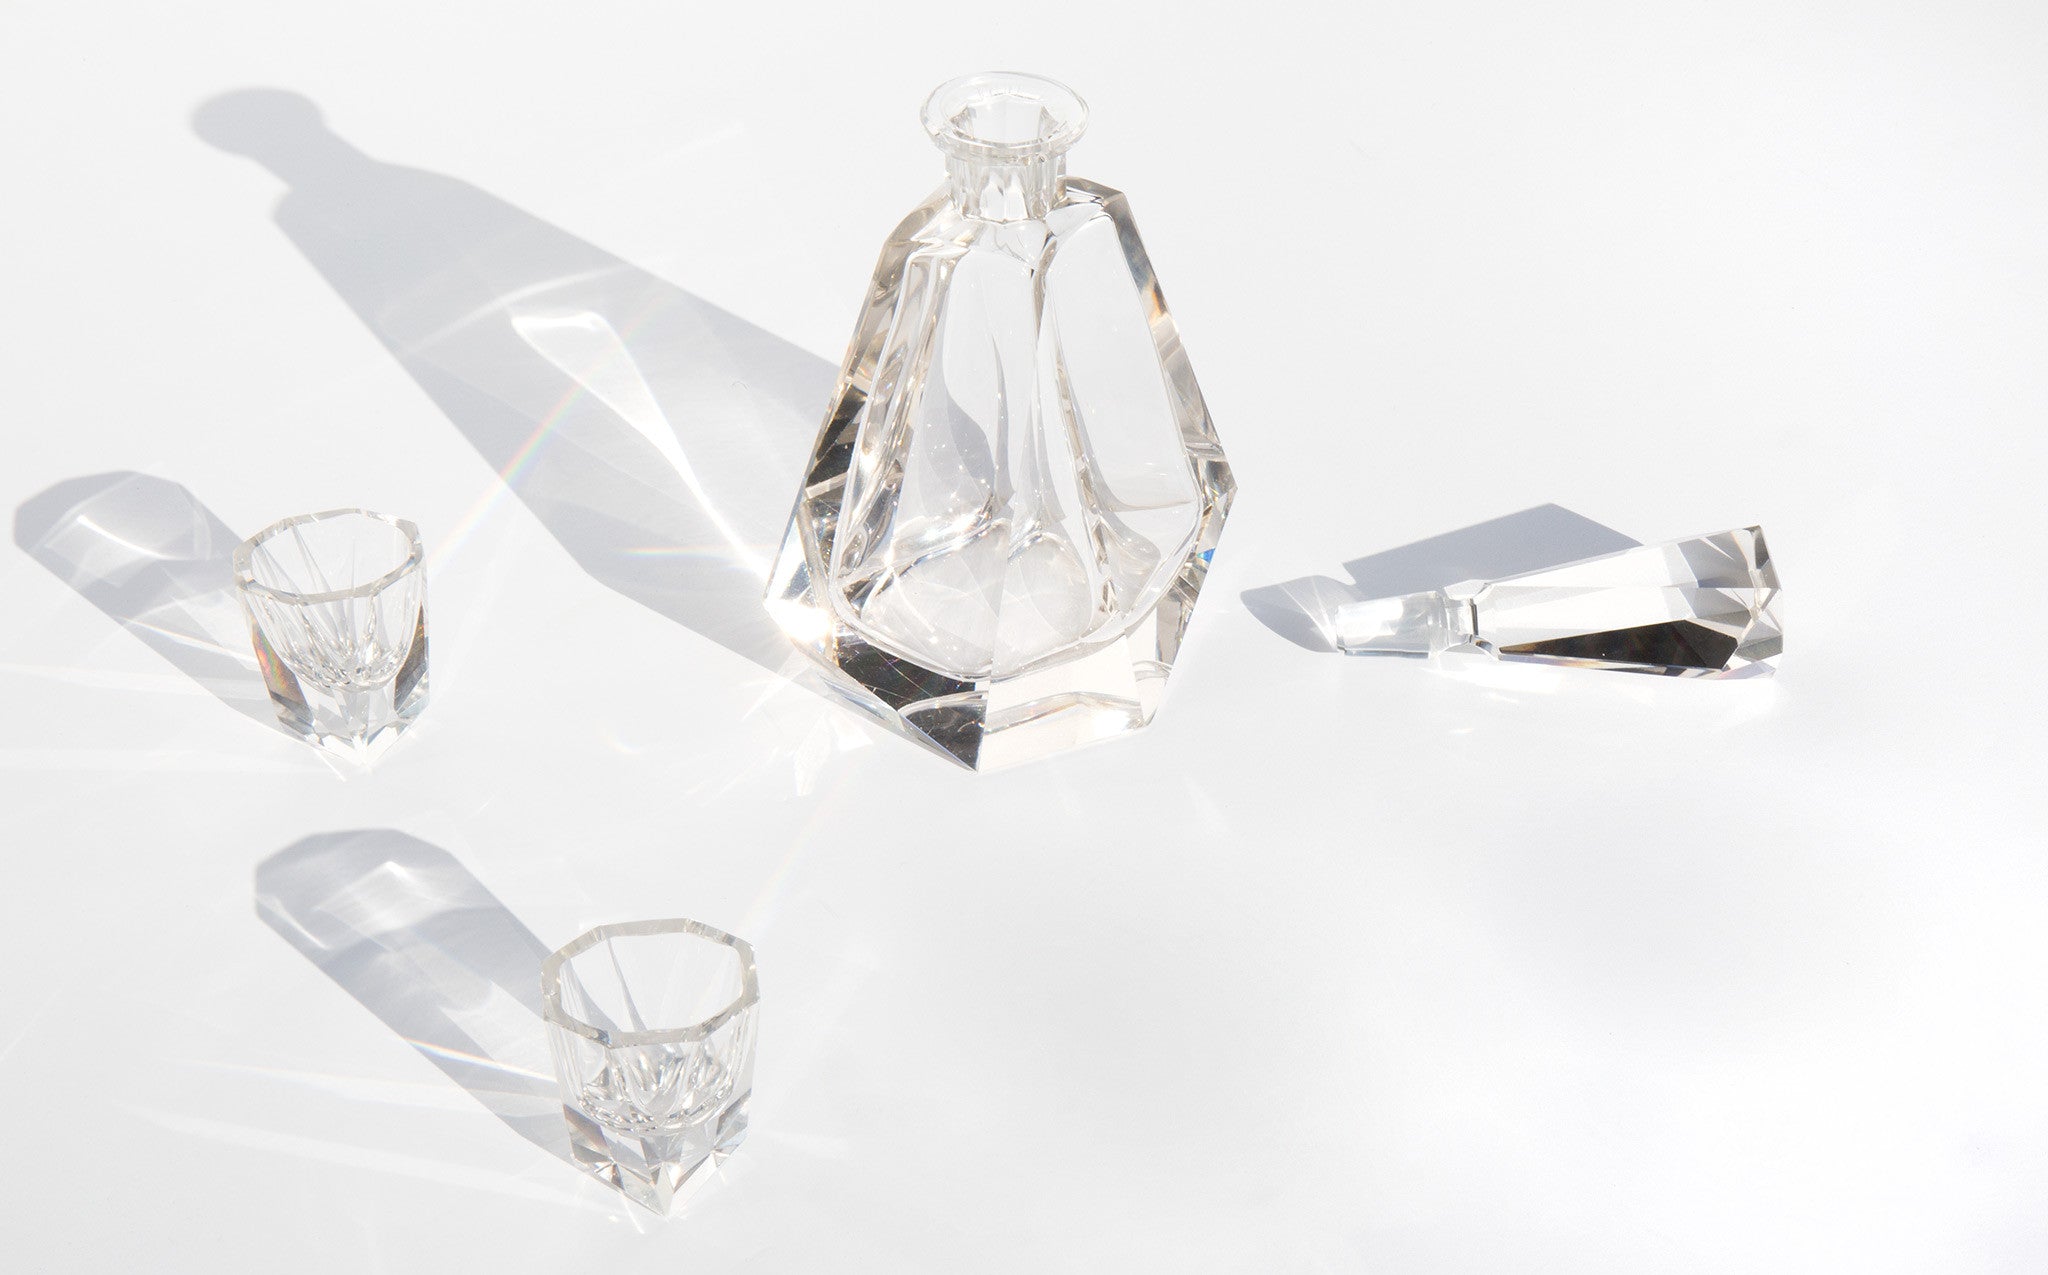 Crystal Prism Decanter and Glasses